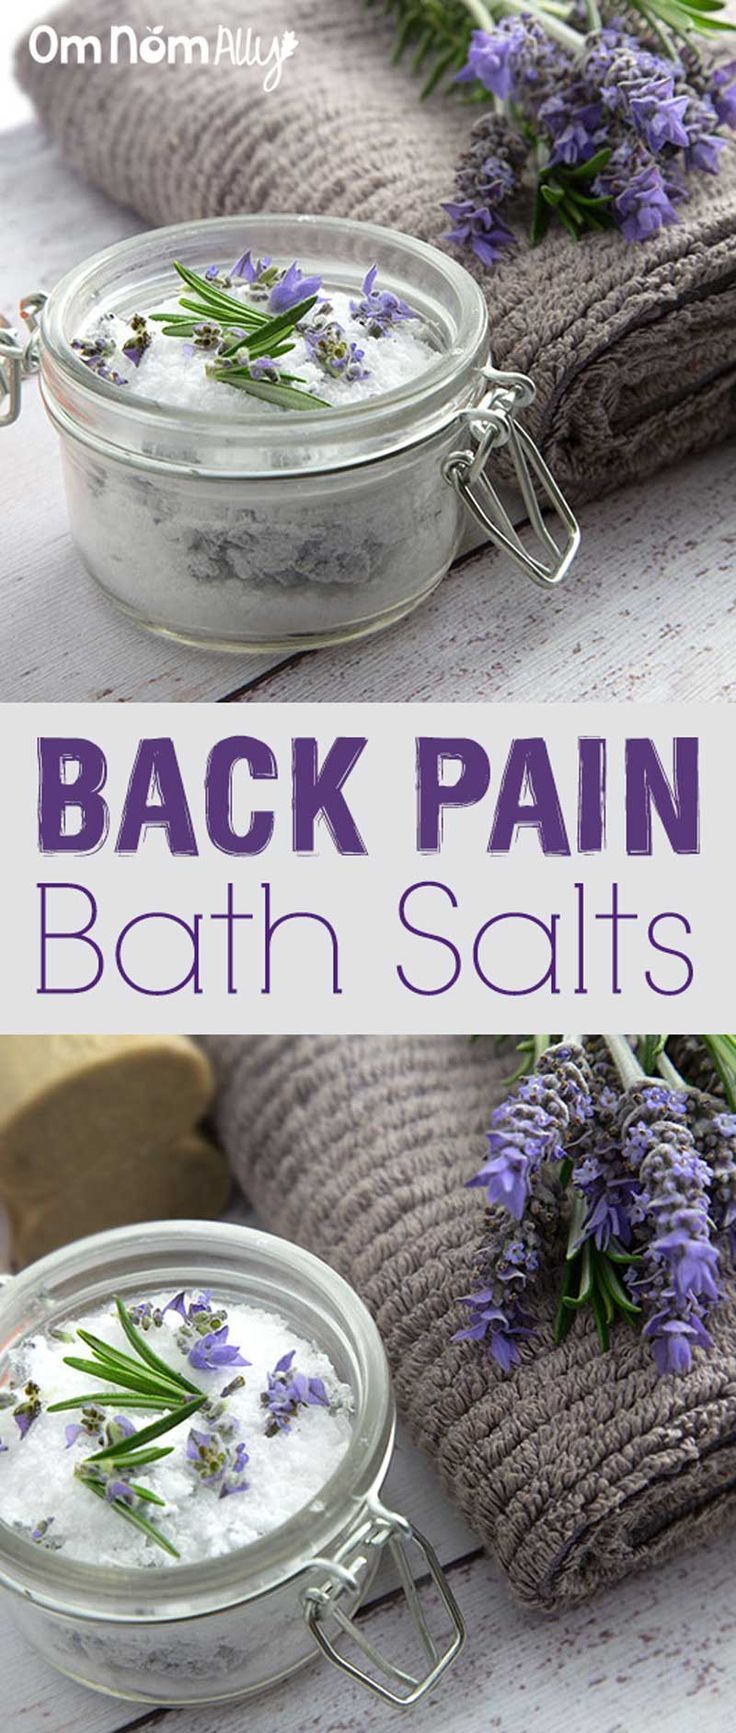 Back Pain Bath Salts @OmNomAlly | Relaxation and relief from back pain and muscle soreness guaranteed!